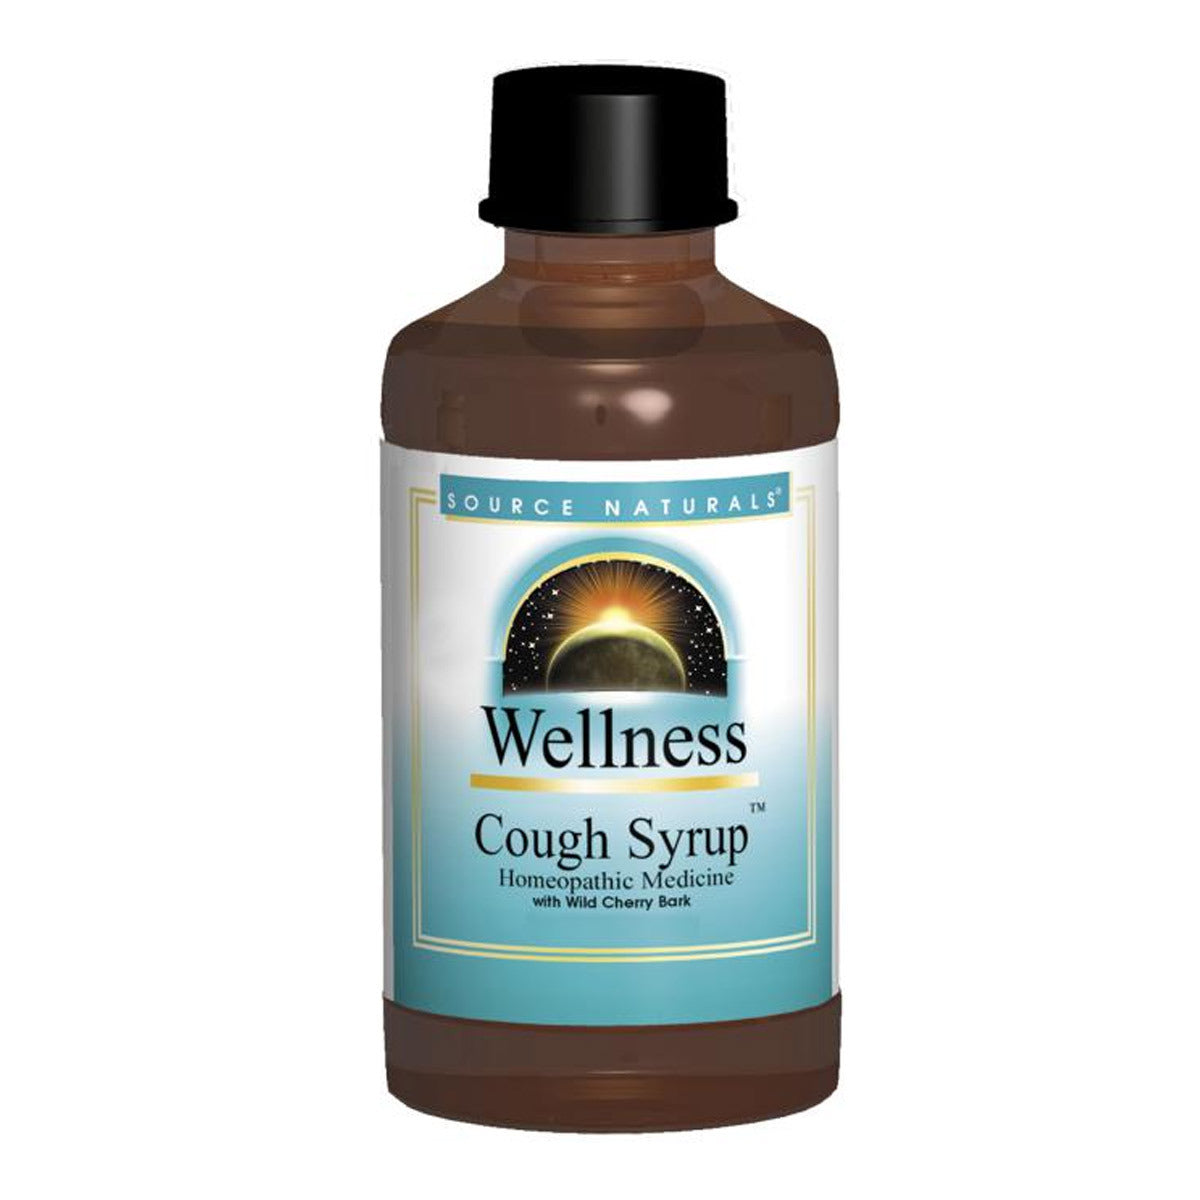 Primary image of Wellness Cough Syrup